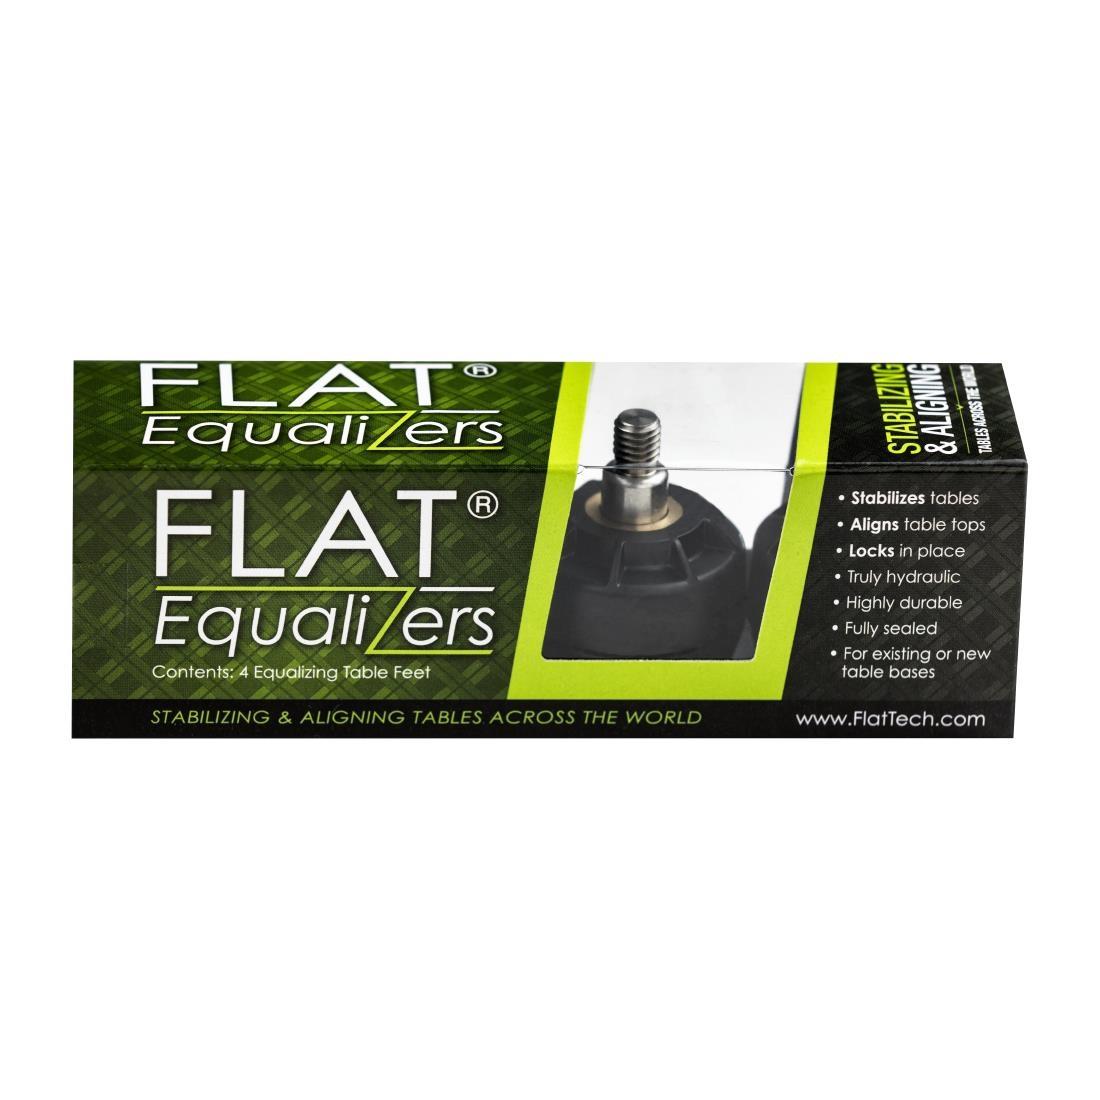 Zzap Flat Equalizers M8 (Pack of 4) - FS121  - 2